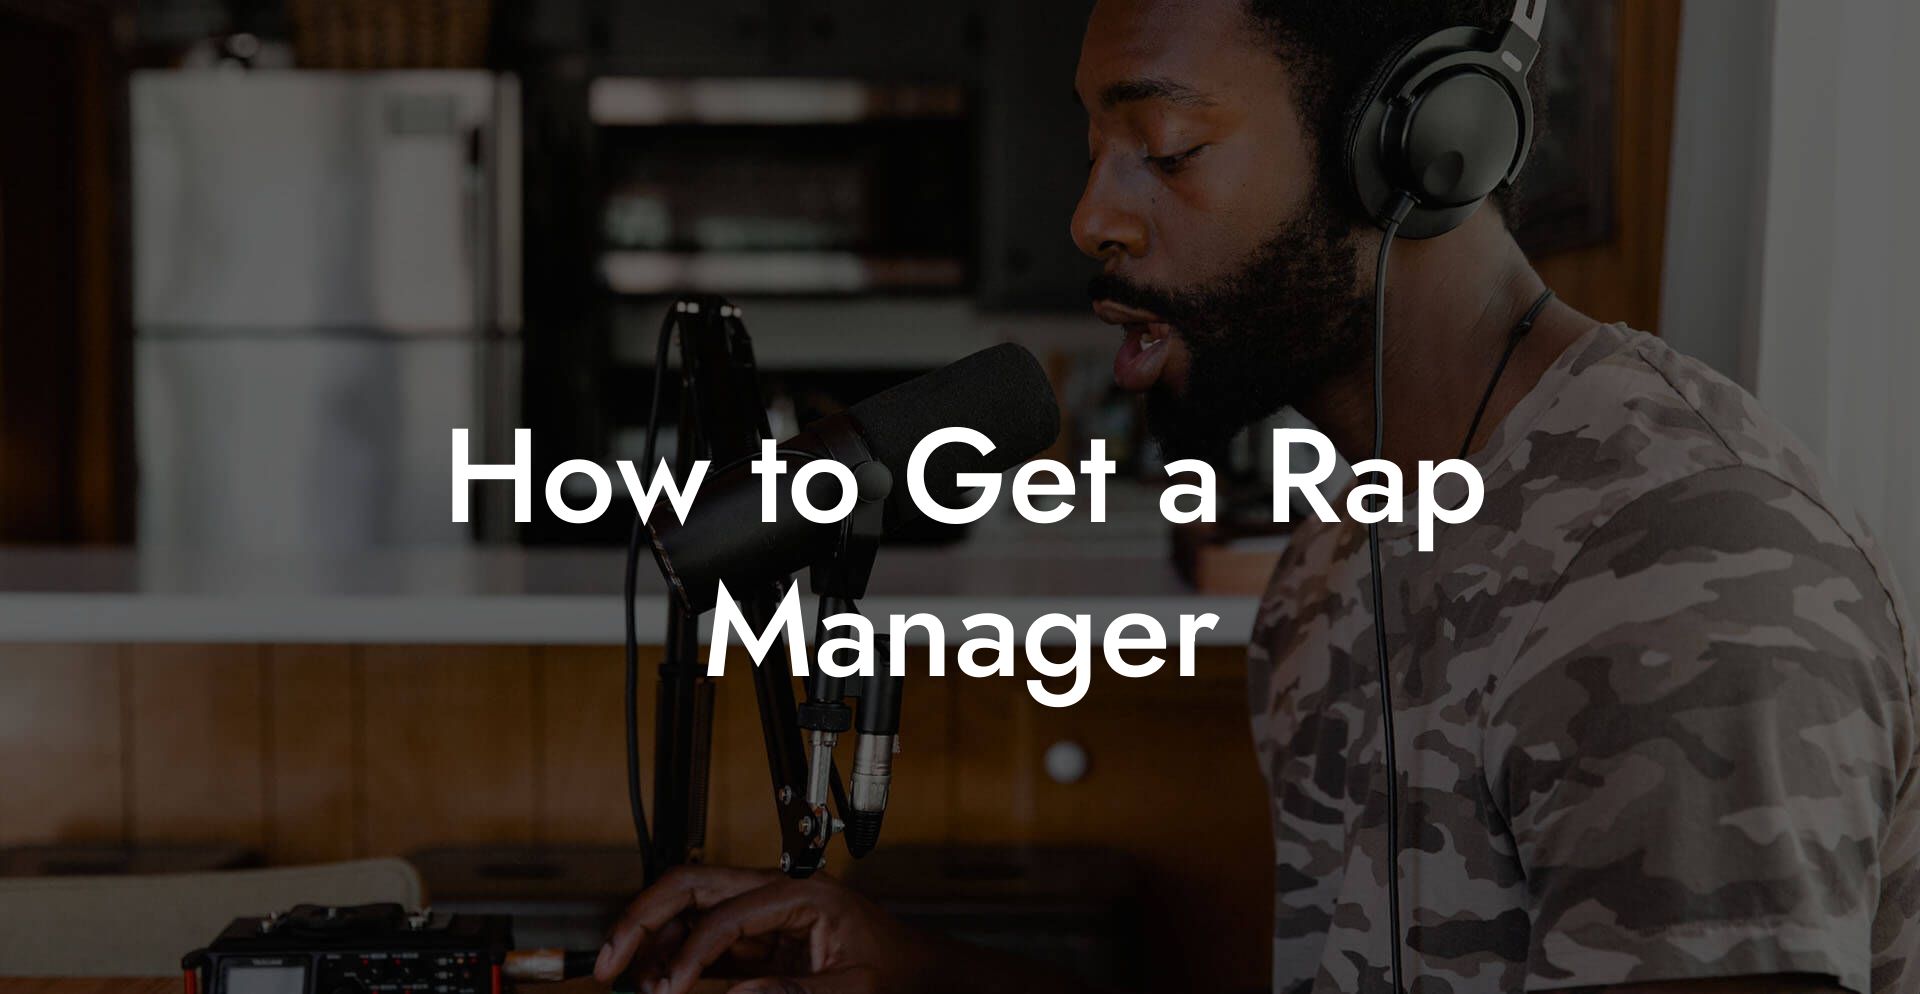 How to Get a Rap Manager